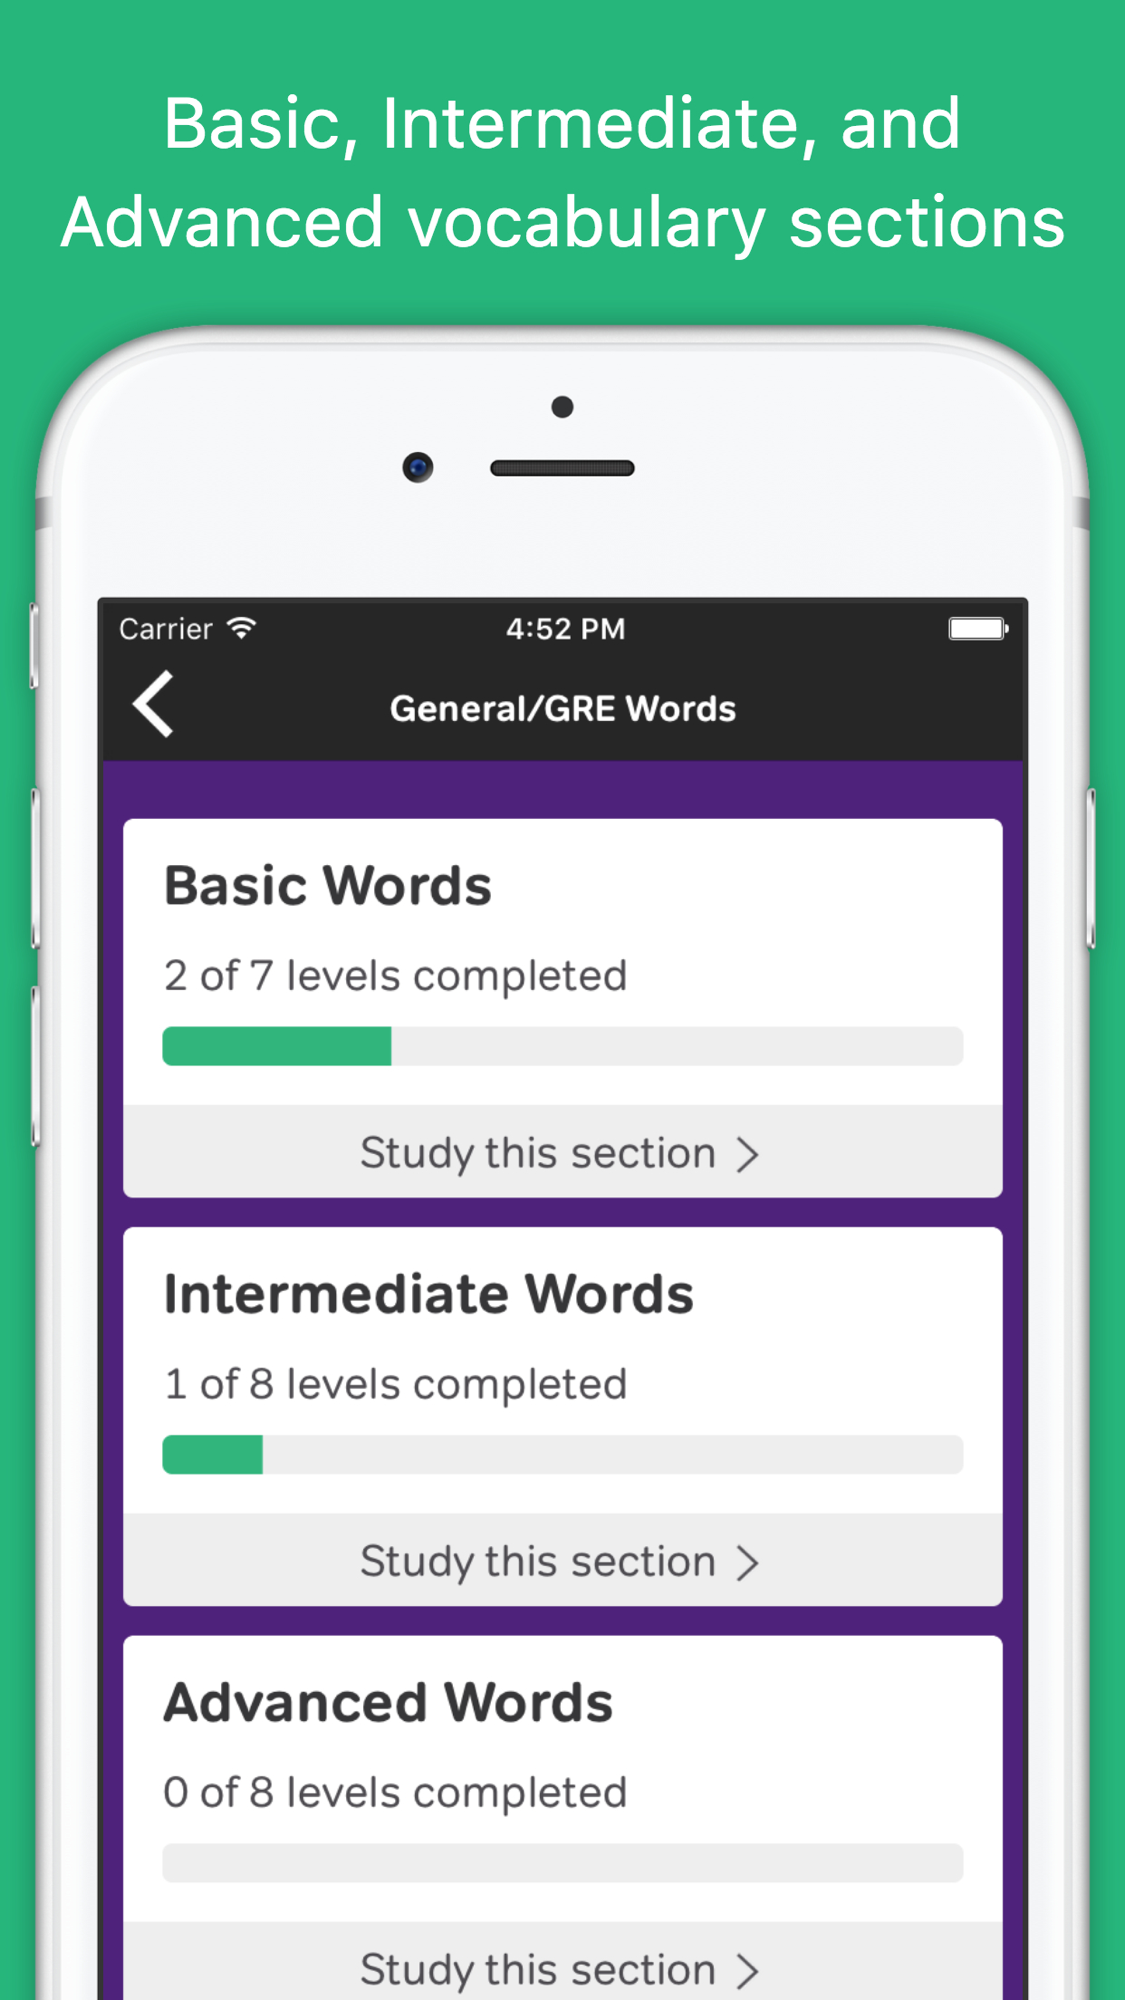 Vocabulary Builder by Magoosh  Featured Image for Version 